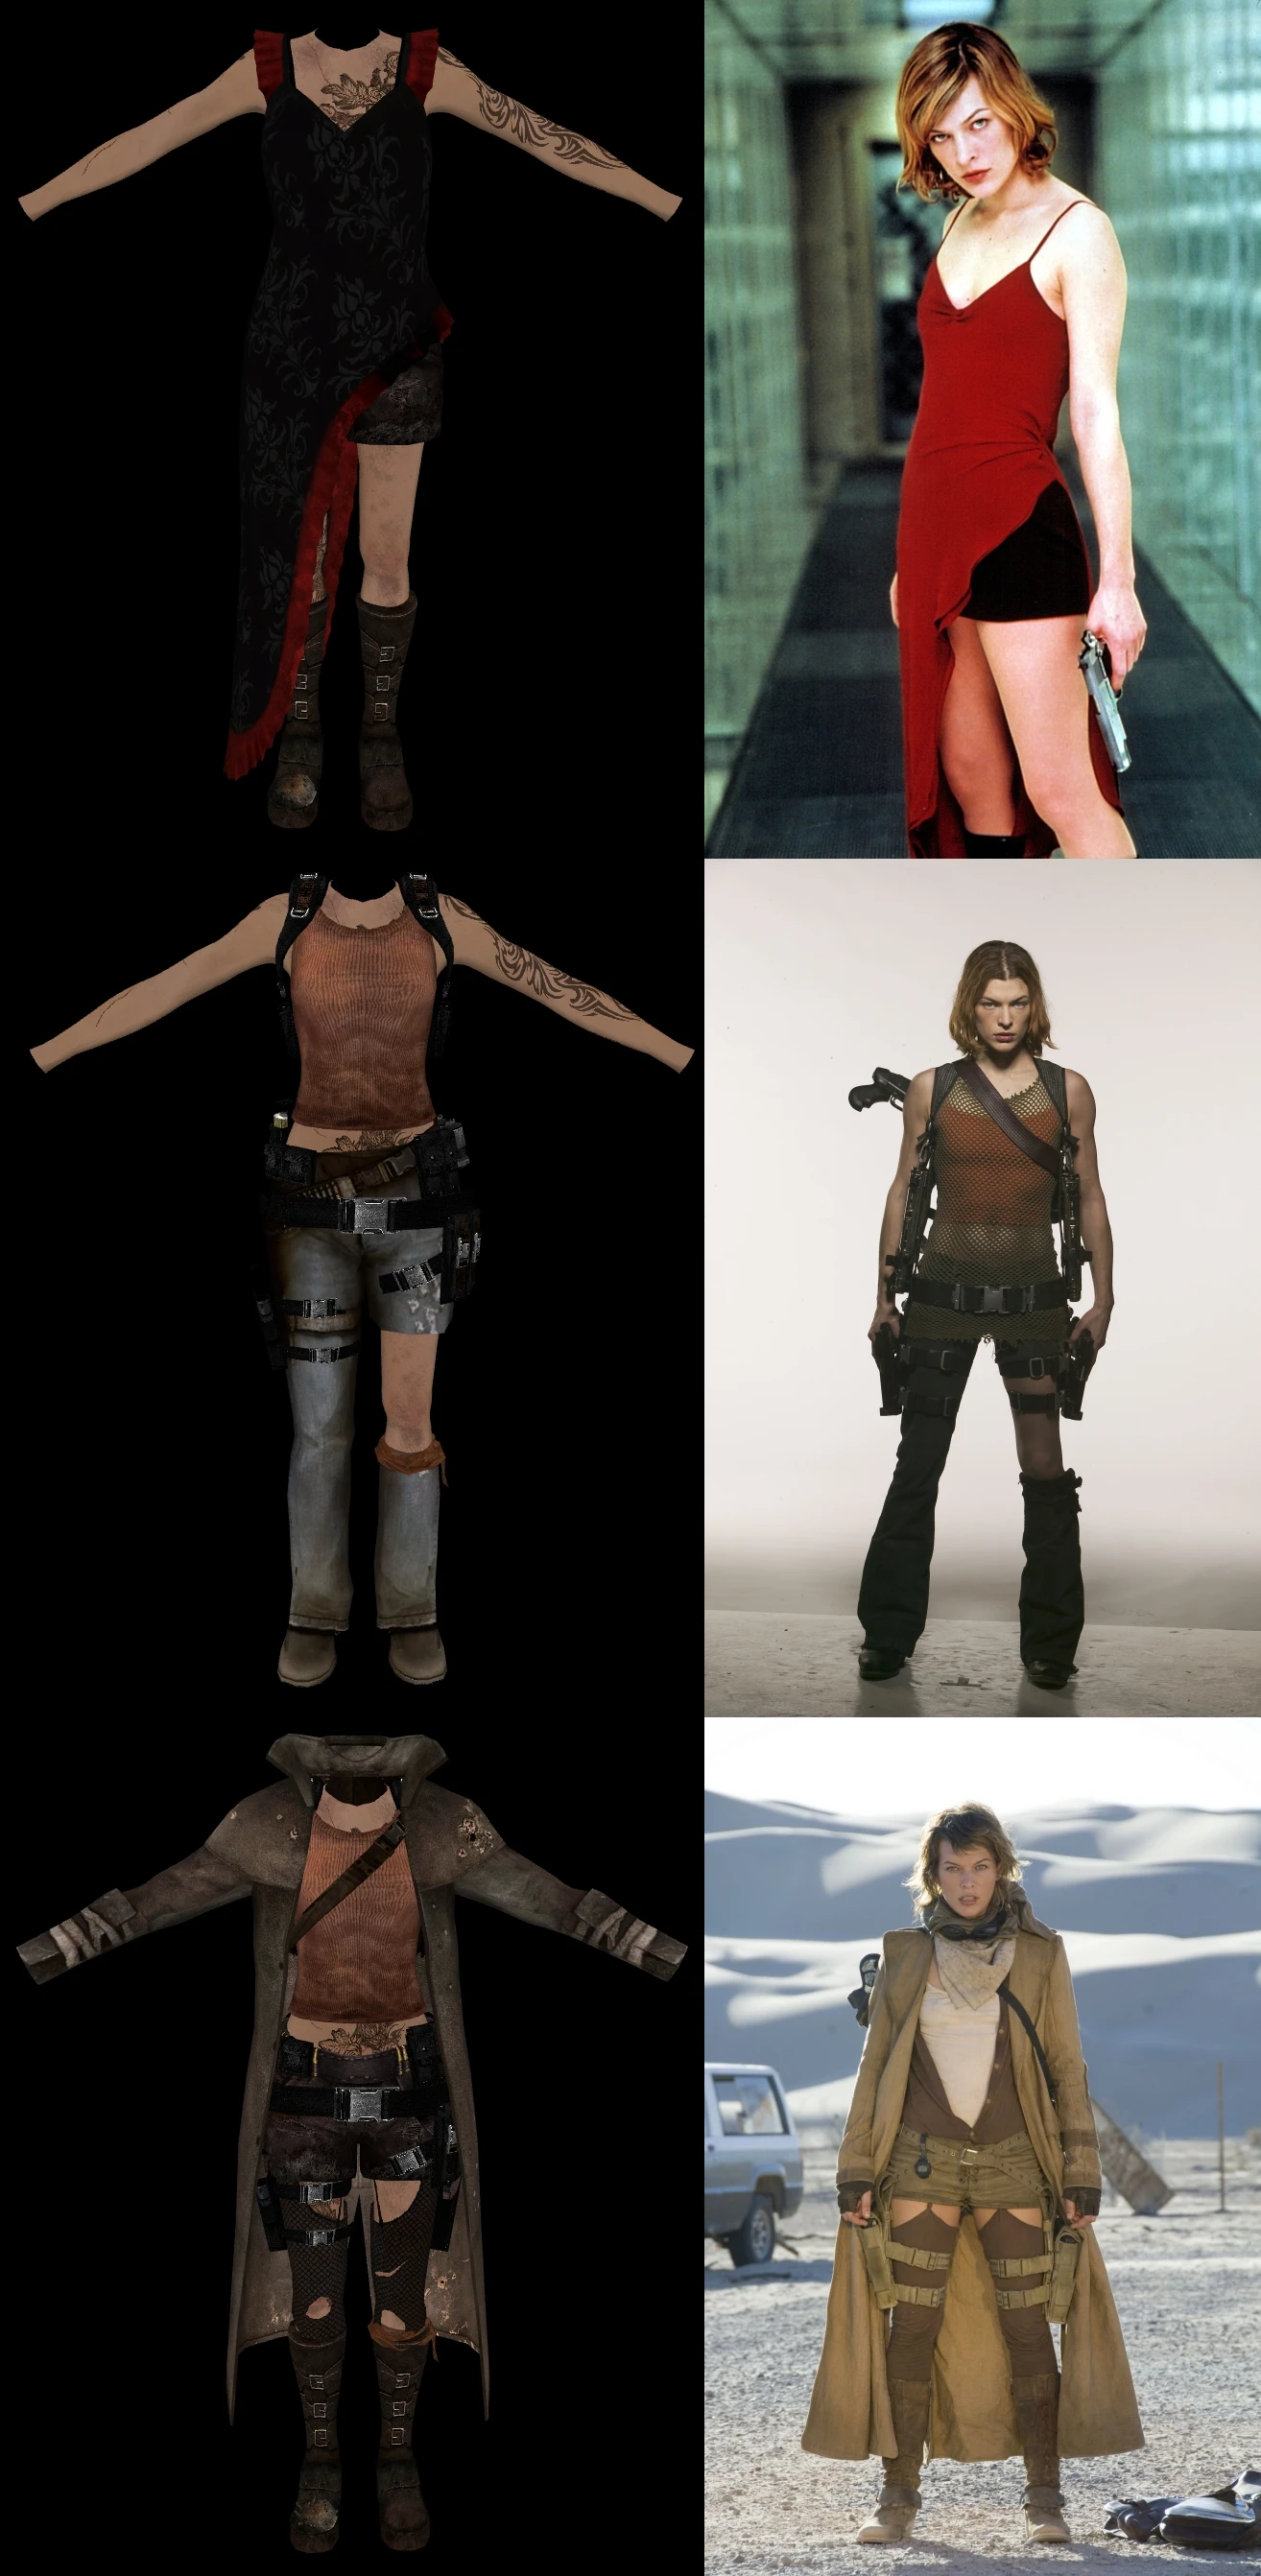 fallout 4 resident evil outfit pack